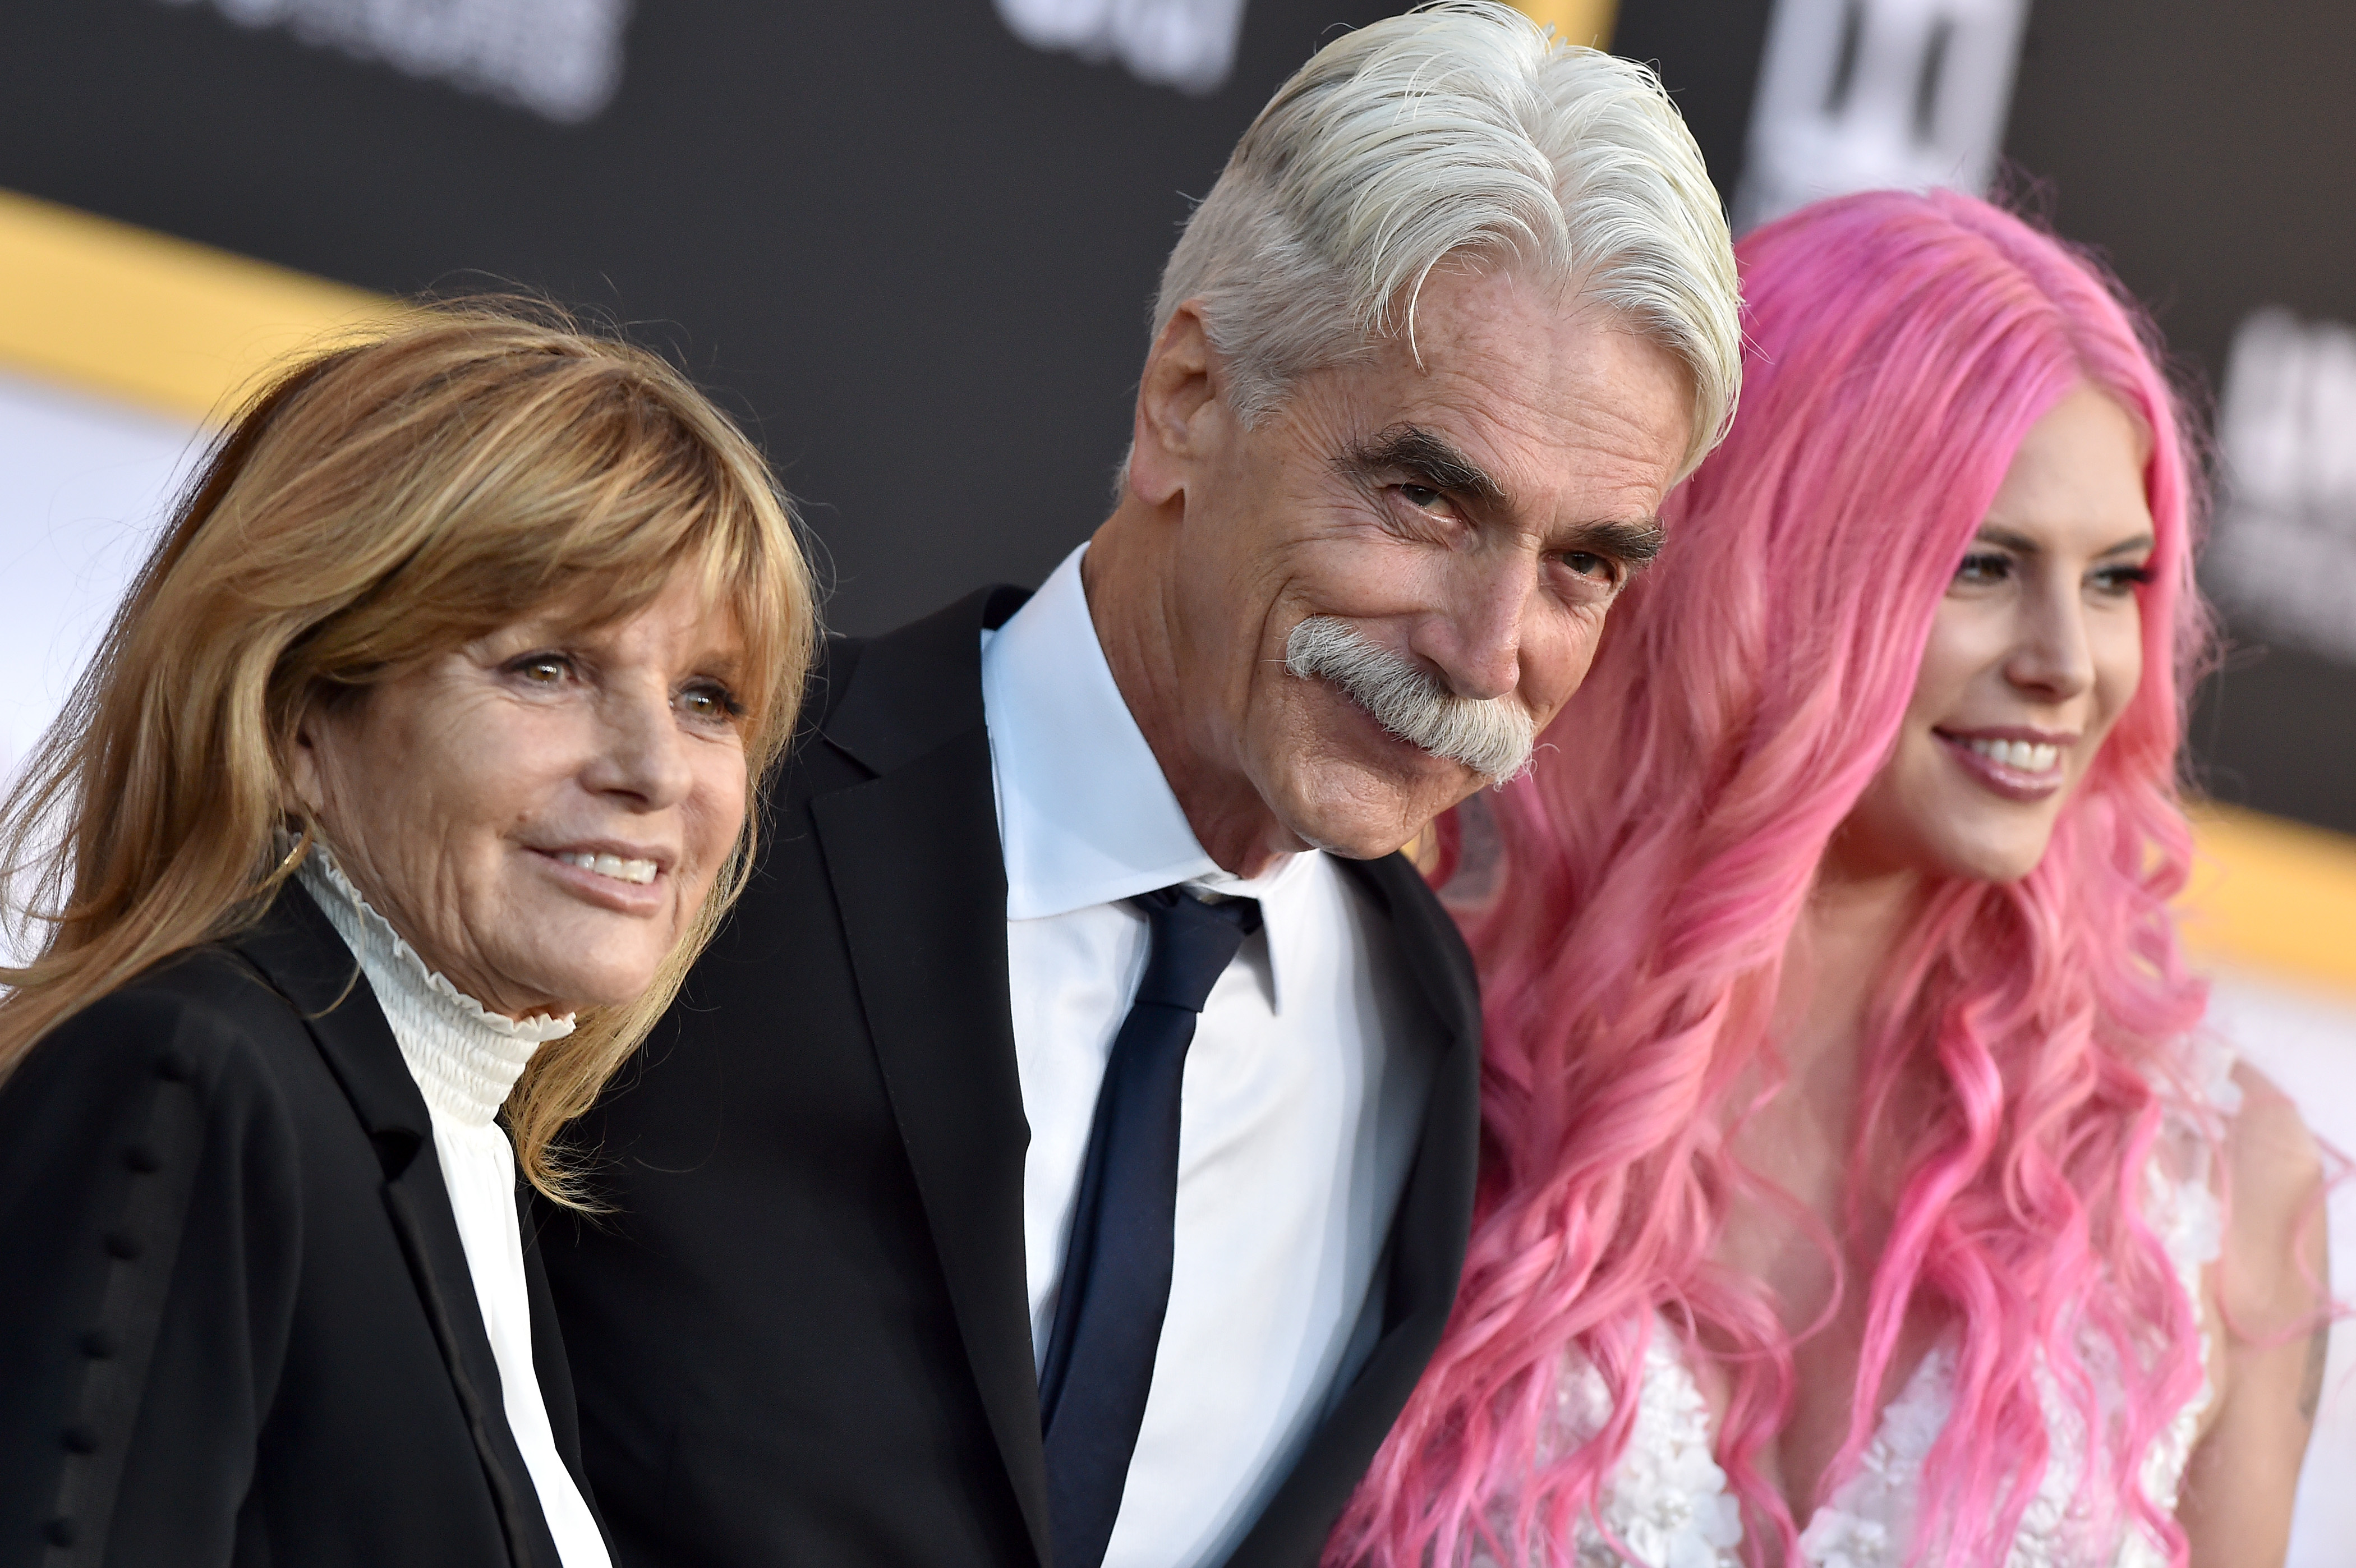 Sam Elliott, his wife Katherine Ross and their daughter Cleo at the premiere of "A Star Is Born" in California in 2018 | Source: Getty Images